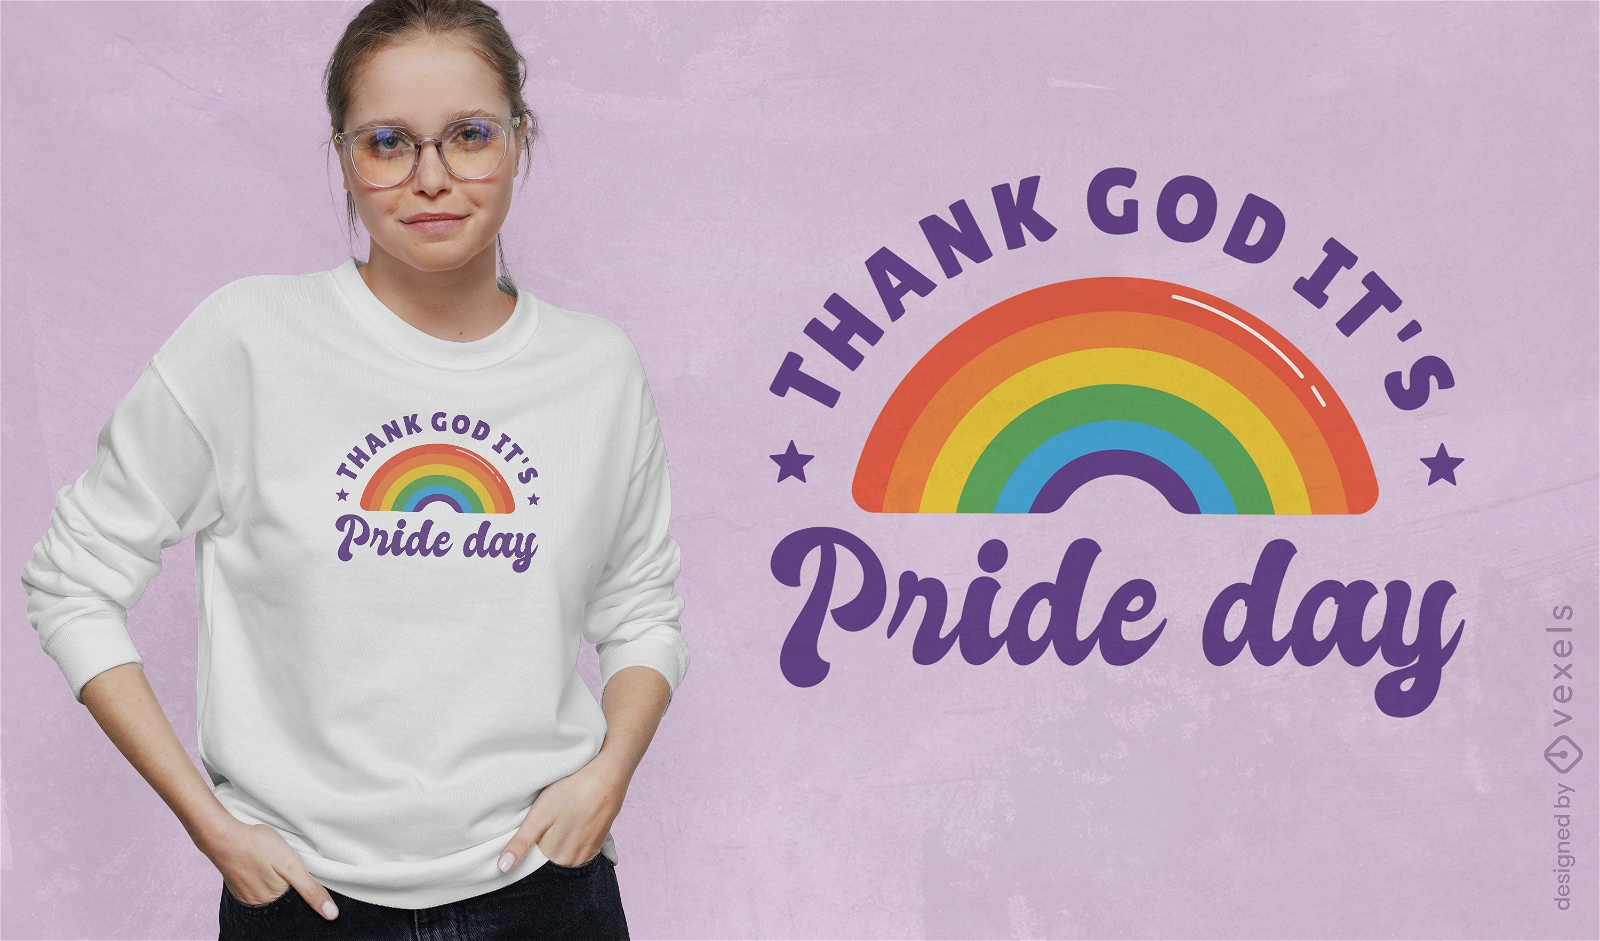 Rainbow for pride day t-shirt design